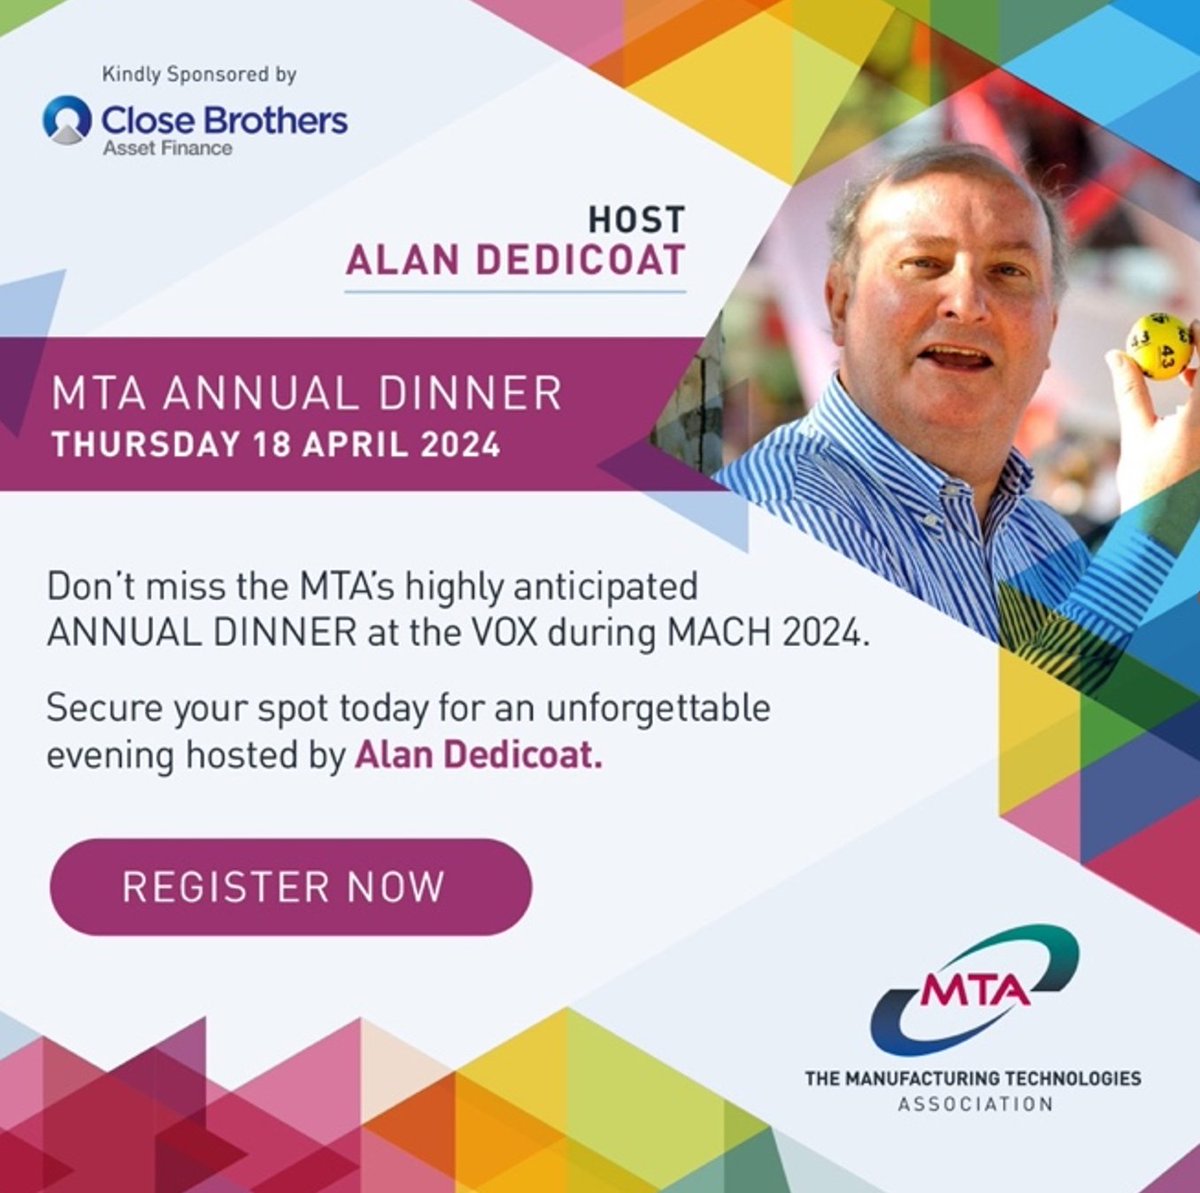 Calling all MTA/EIA/AMUK Members and Non-members! Don't miss the MTA's highly anticipated Annual Dinner at the VOX during MACH 2024. Secure your spot today for an unforgettable evening hosted by Alan Dedicoat! bit.ly/45rg3vK #manufacturing #ukmfg #networking